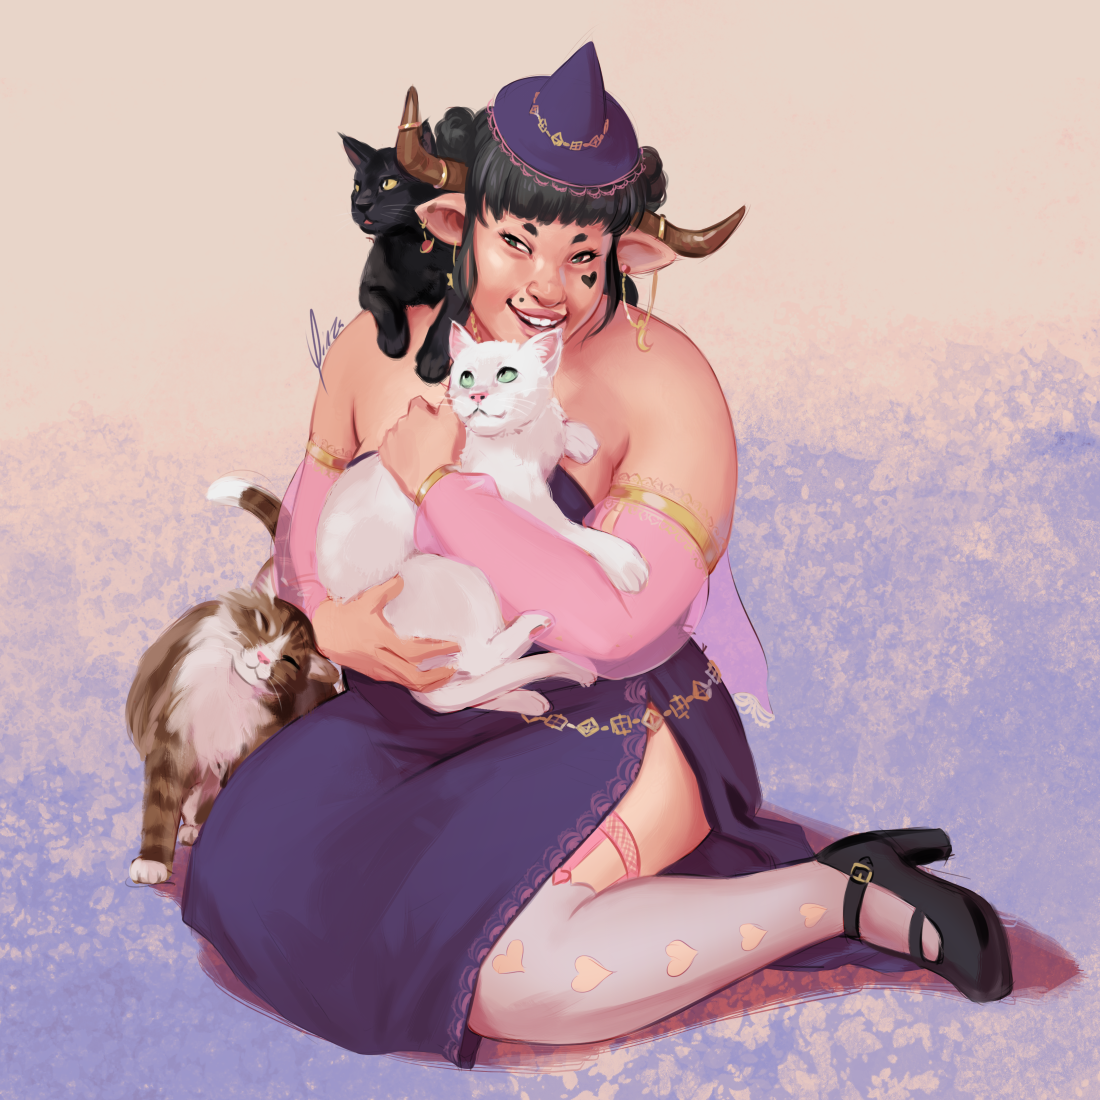 A digital painting of a heavyset draph woman. She is sitting on the floor holding one cat in her arms while another perches on her shoulder and a third rubs against her arm. She is wearing a dark purple dress with disconnected translucent sleeves, a short cape, and a small pointed hat.